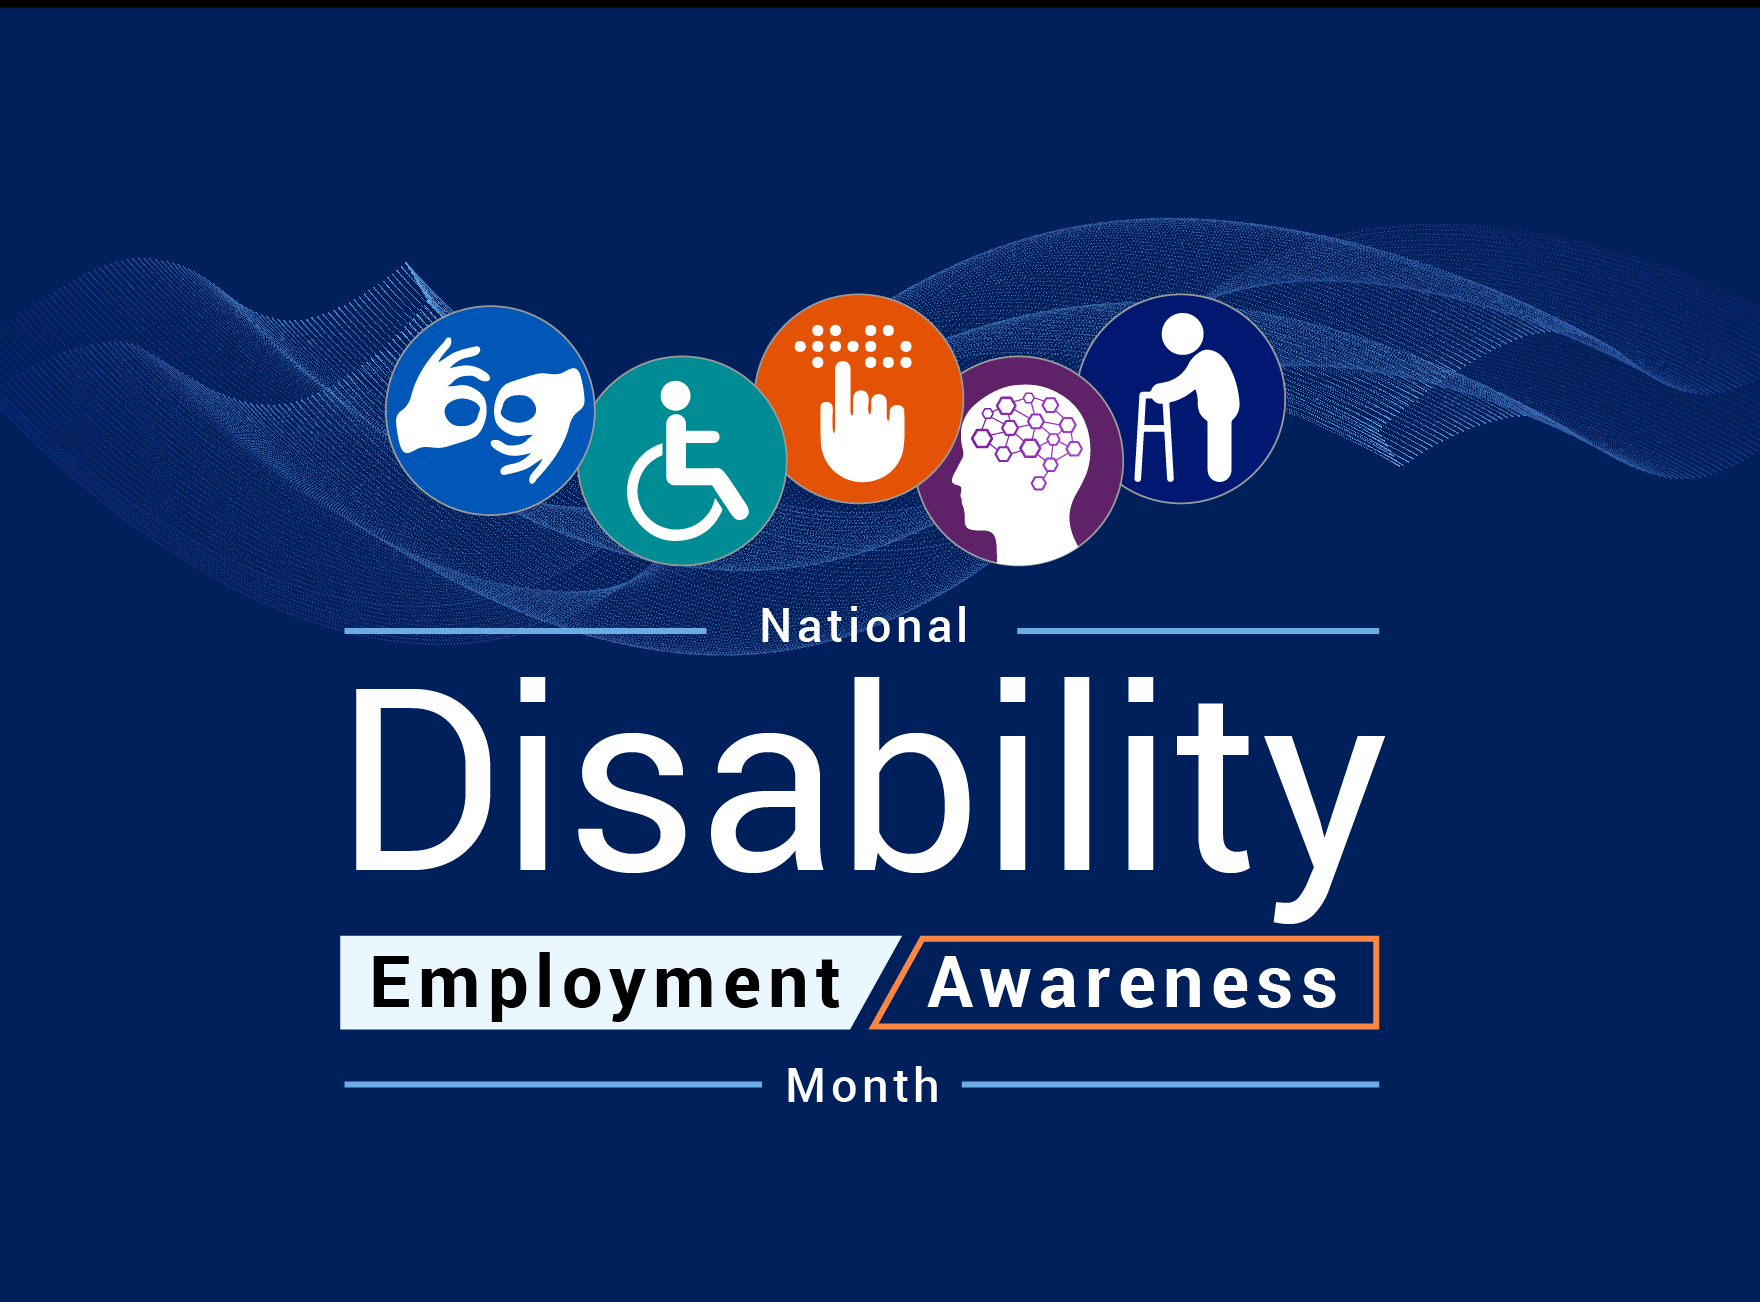 National Disability Employment Awareness Month text with icons representing different disabilities